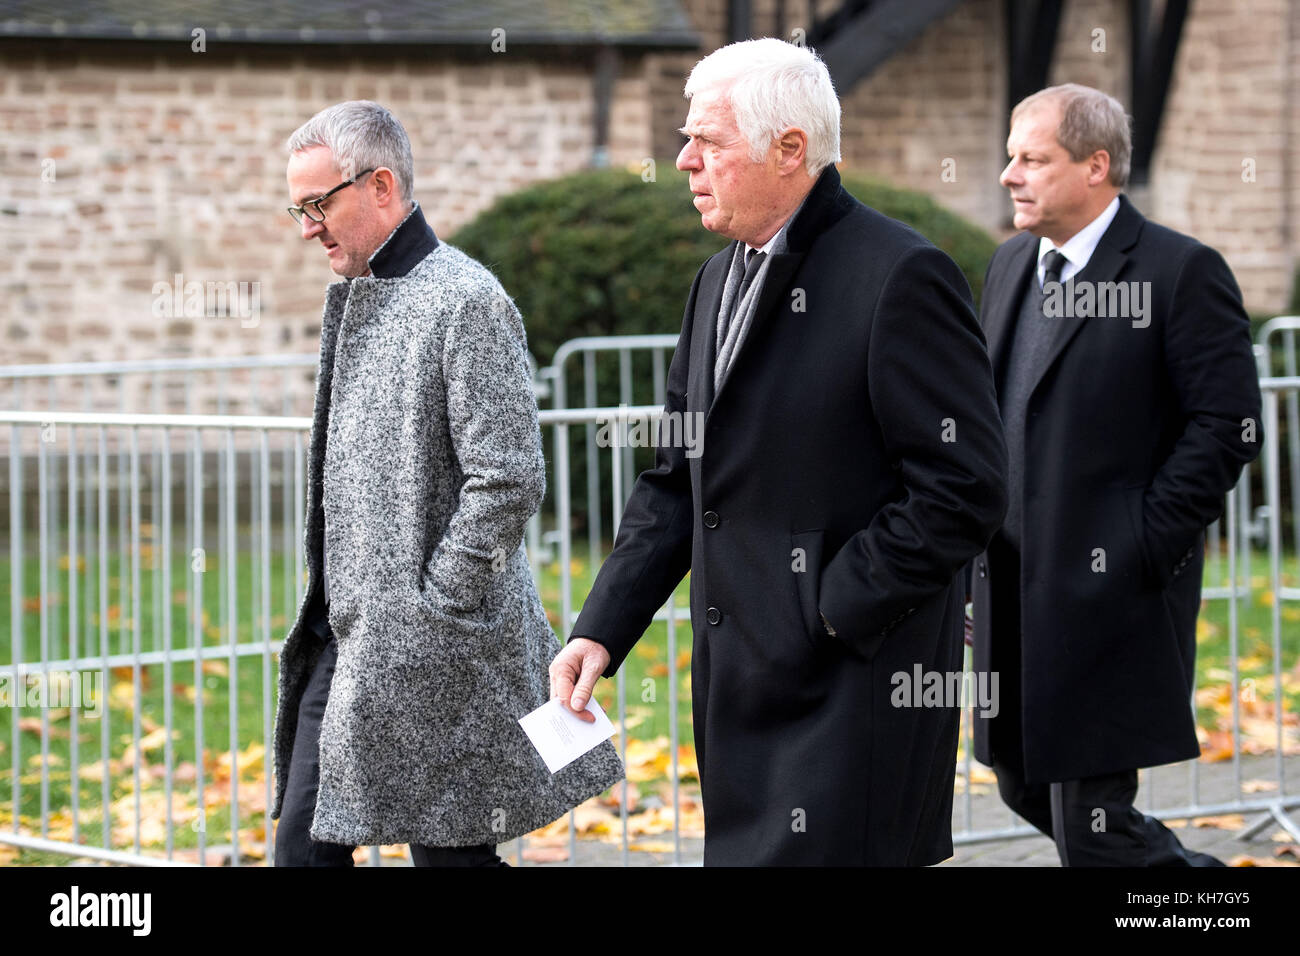 Cologne, Germany. 14th Nov, 2017. Manager of 1. FC Koeln Alexander Wehrle  (L-R), president Werner Spinner and vice president MArkus Ritterbacharrive  at the mourning ceremony of the departed former soccer player Hans